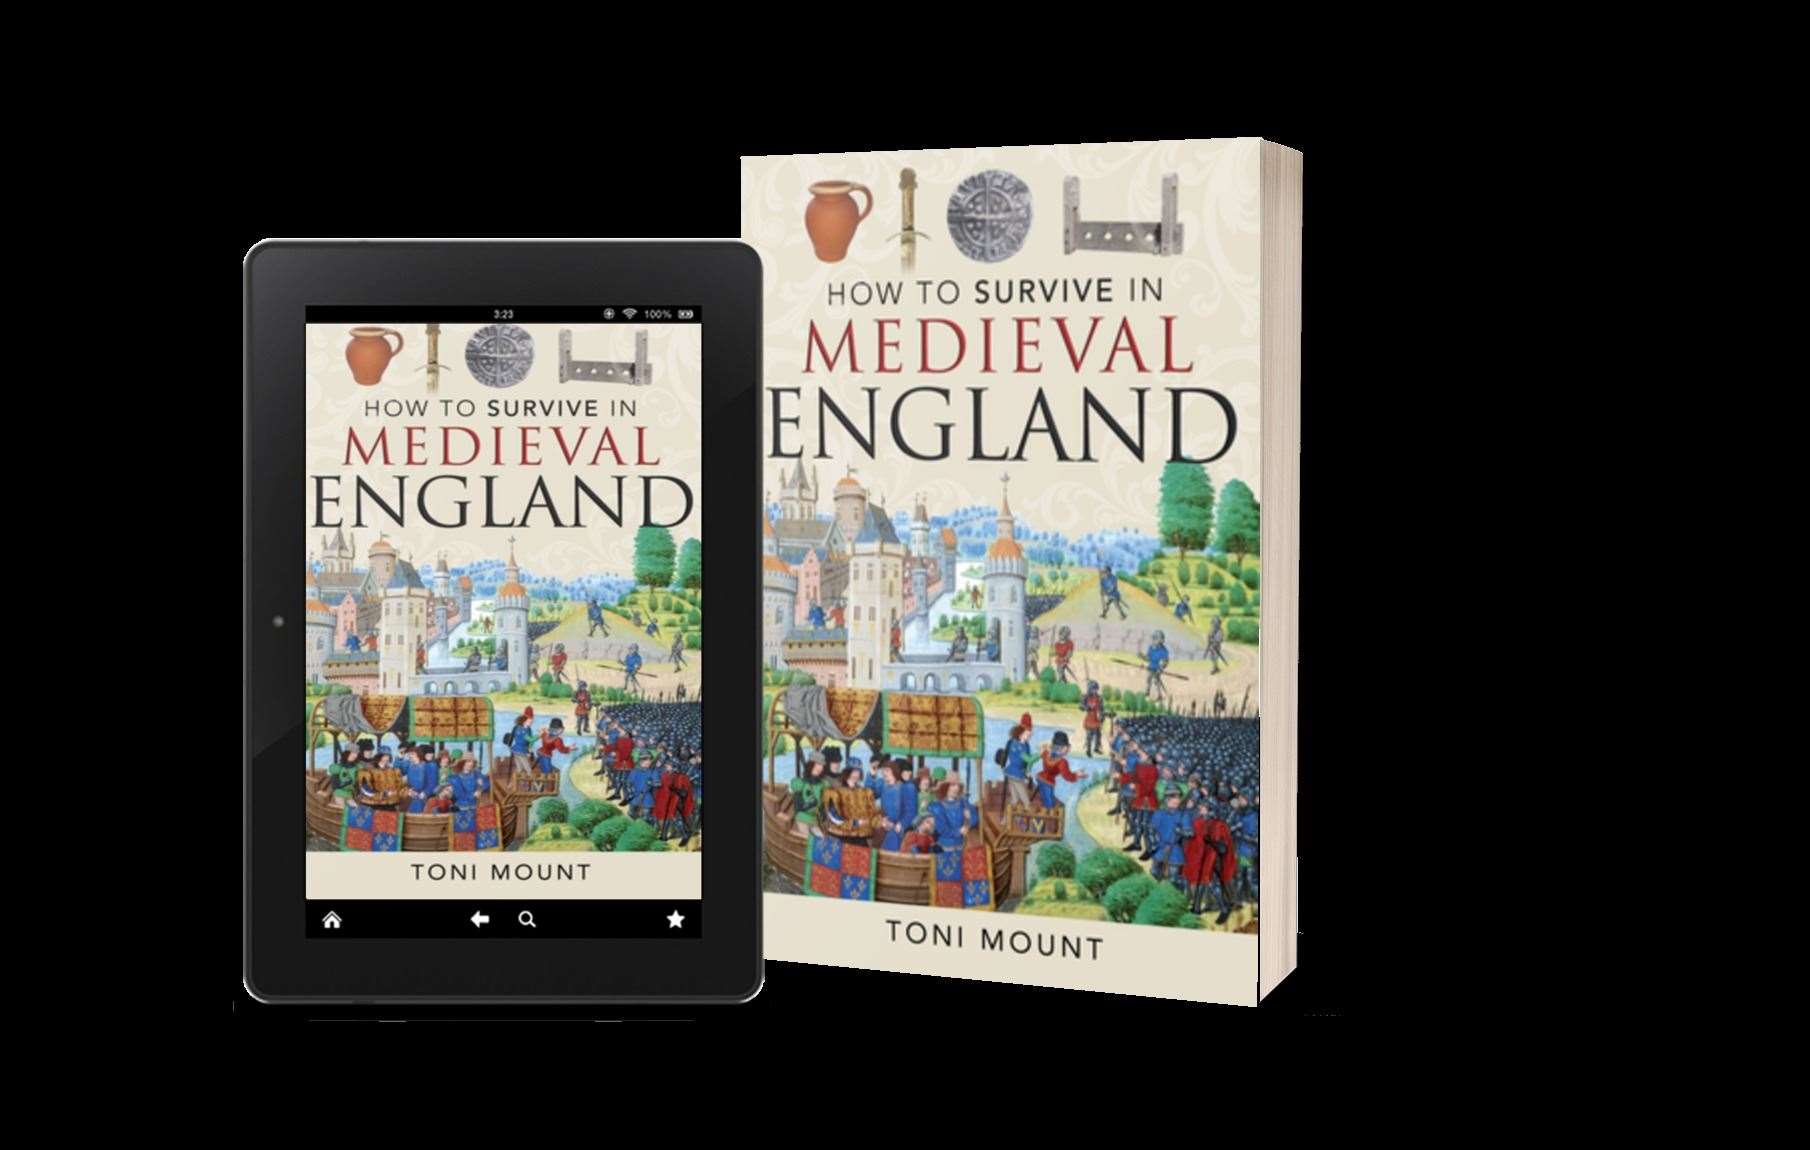 How to Survive Medieval England by Toni Mount